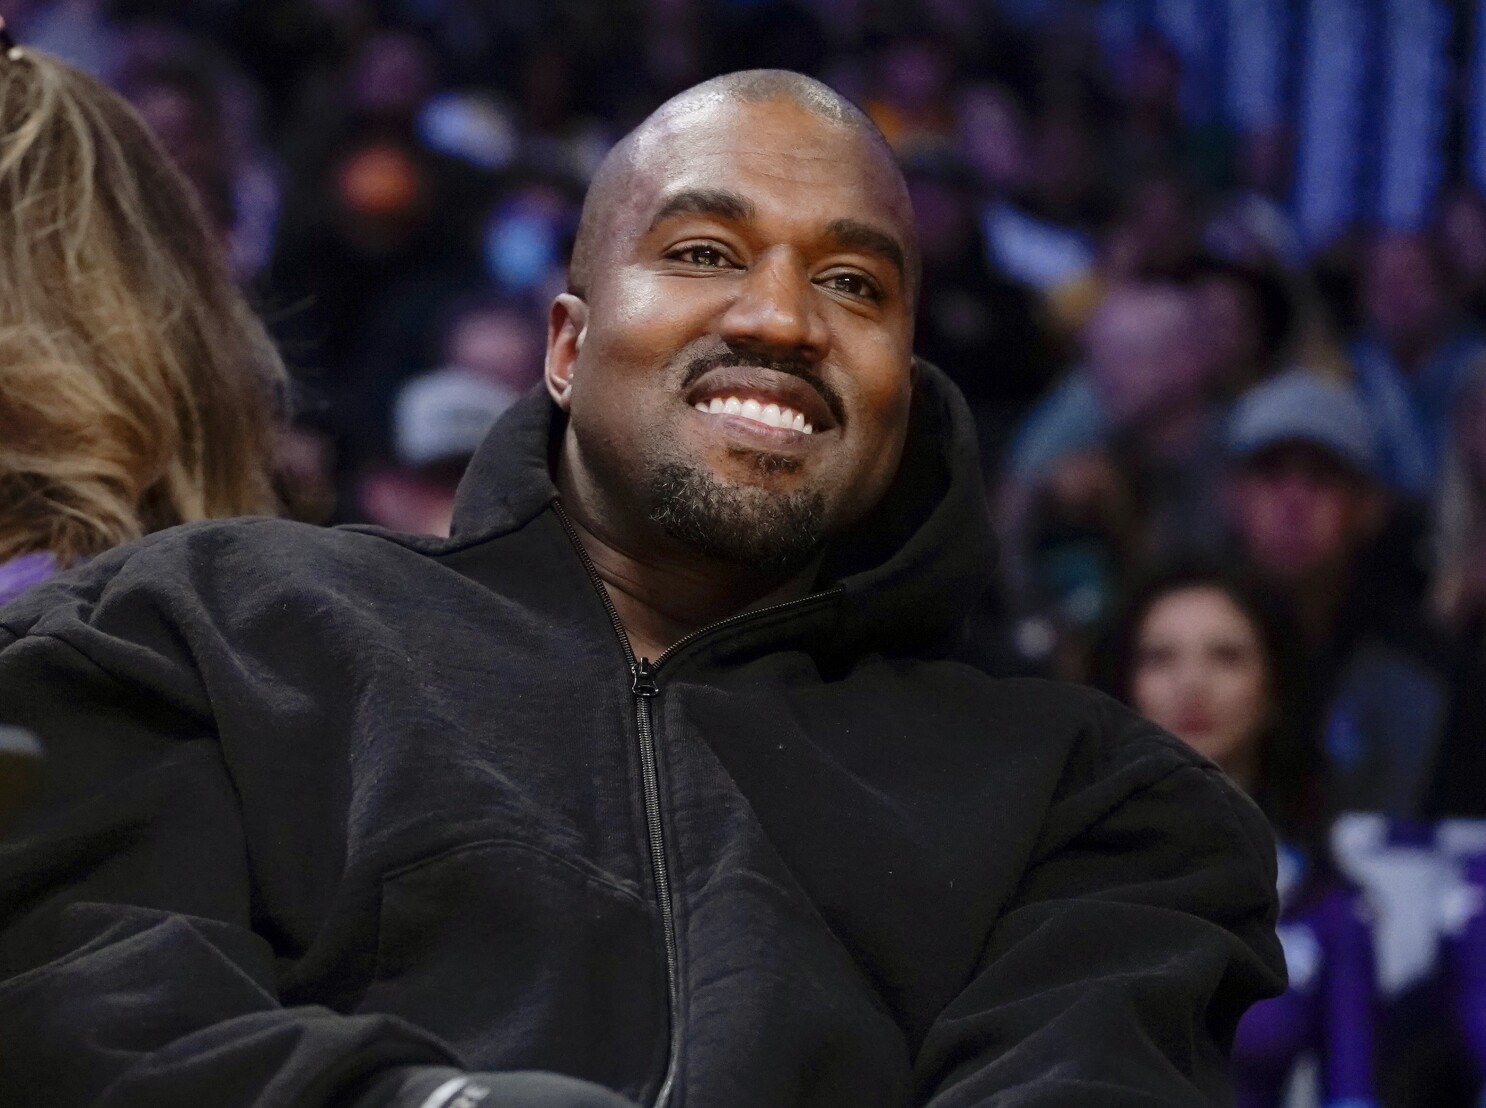 Adidas CEO doubts that Kanye West really meant the antisemitic